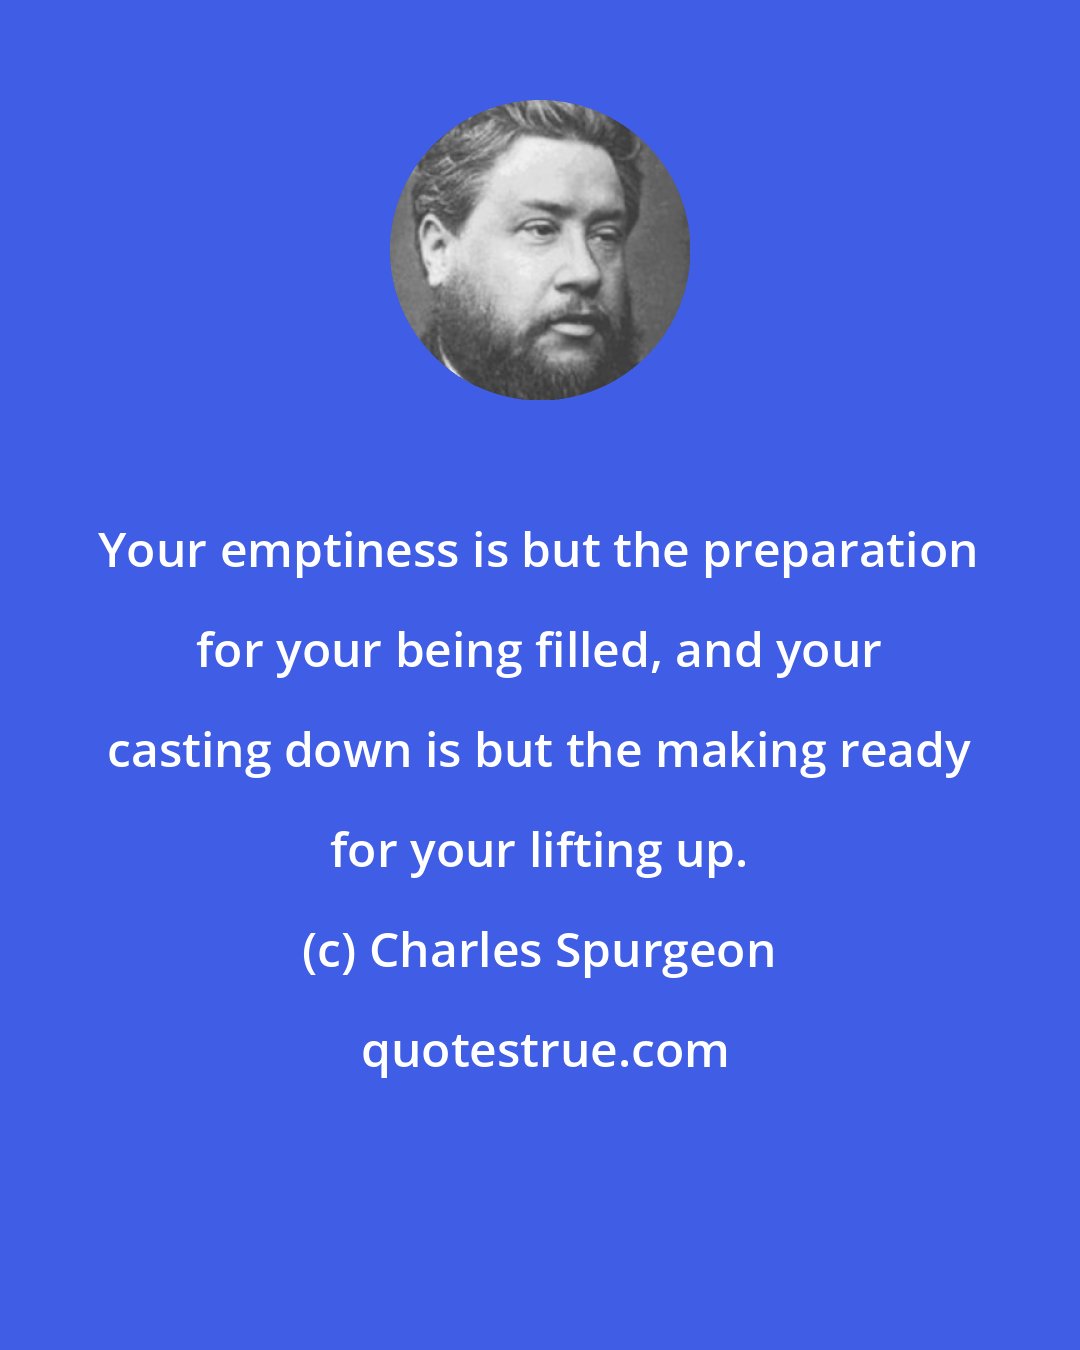 Charles Spurgeon: Your emptiness is but the preparation for your being filled, and your casting down is but the making ready for your lifting up.